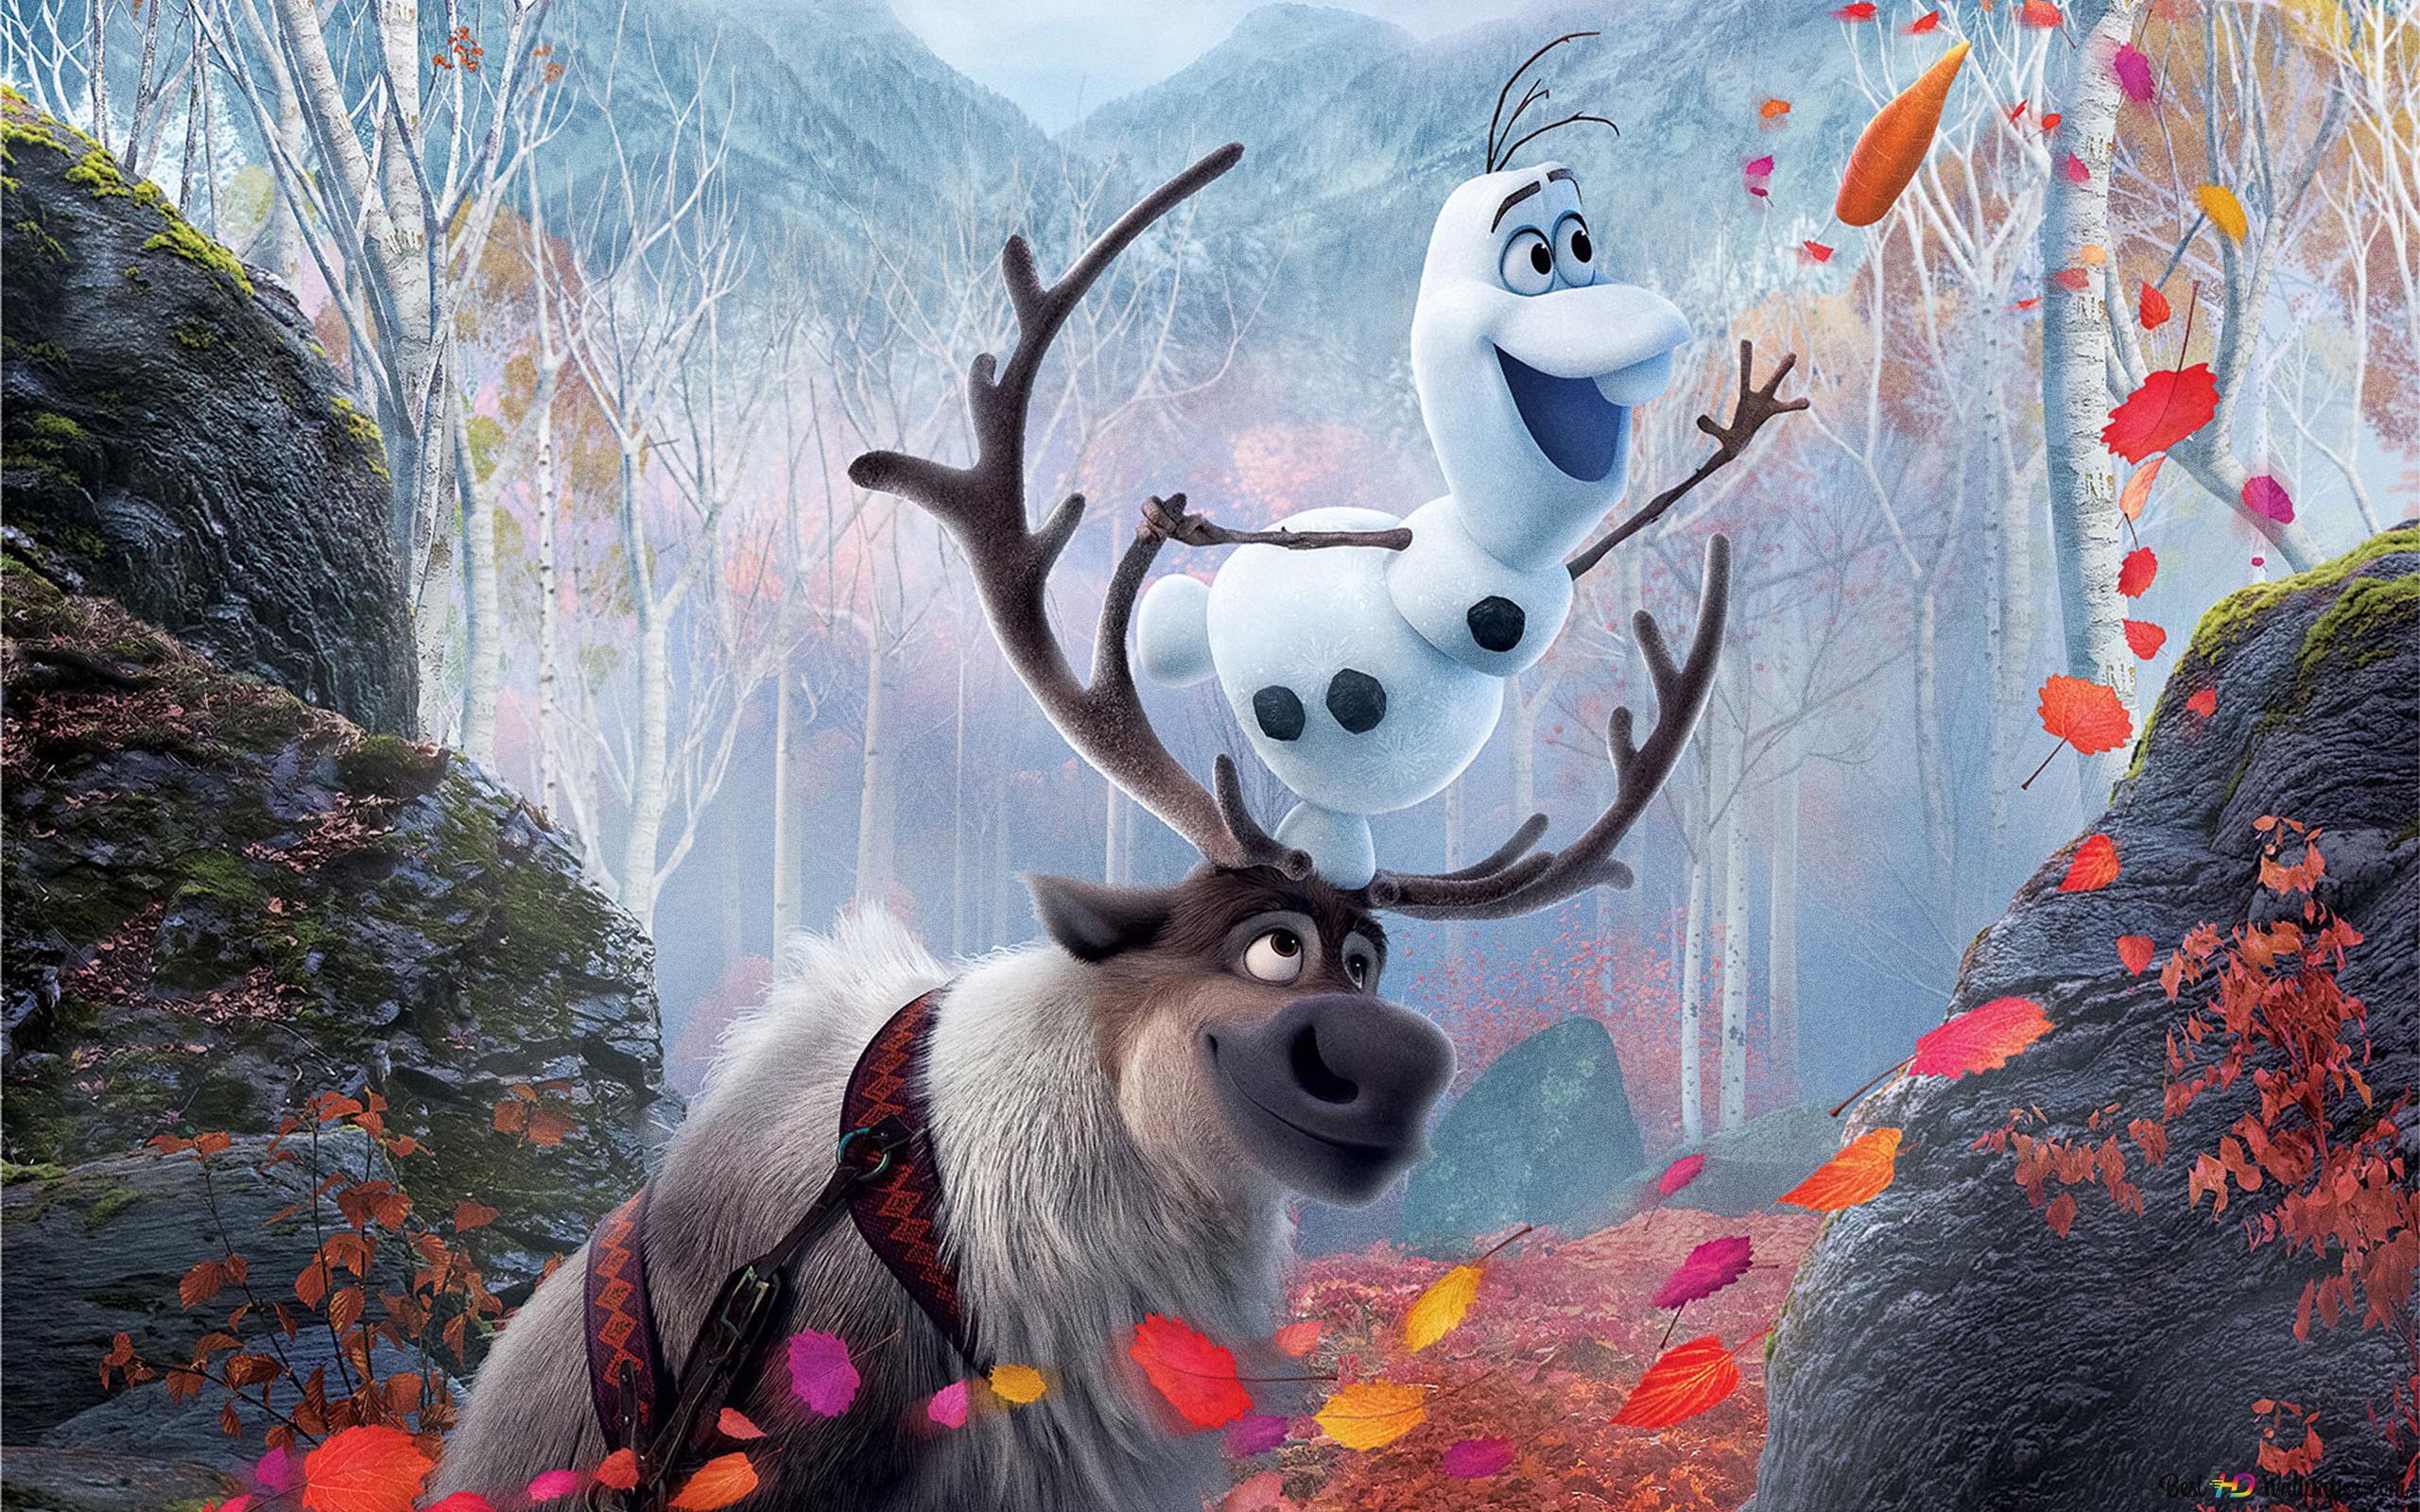 Olaf and Sven playing with autumn leaves at the Enchanted forest 2K wallpaper download